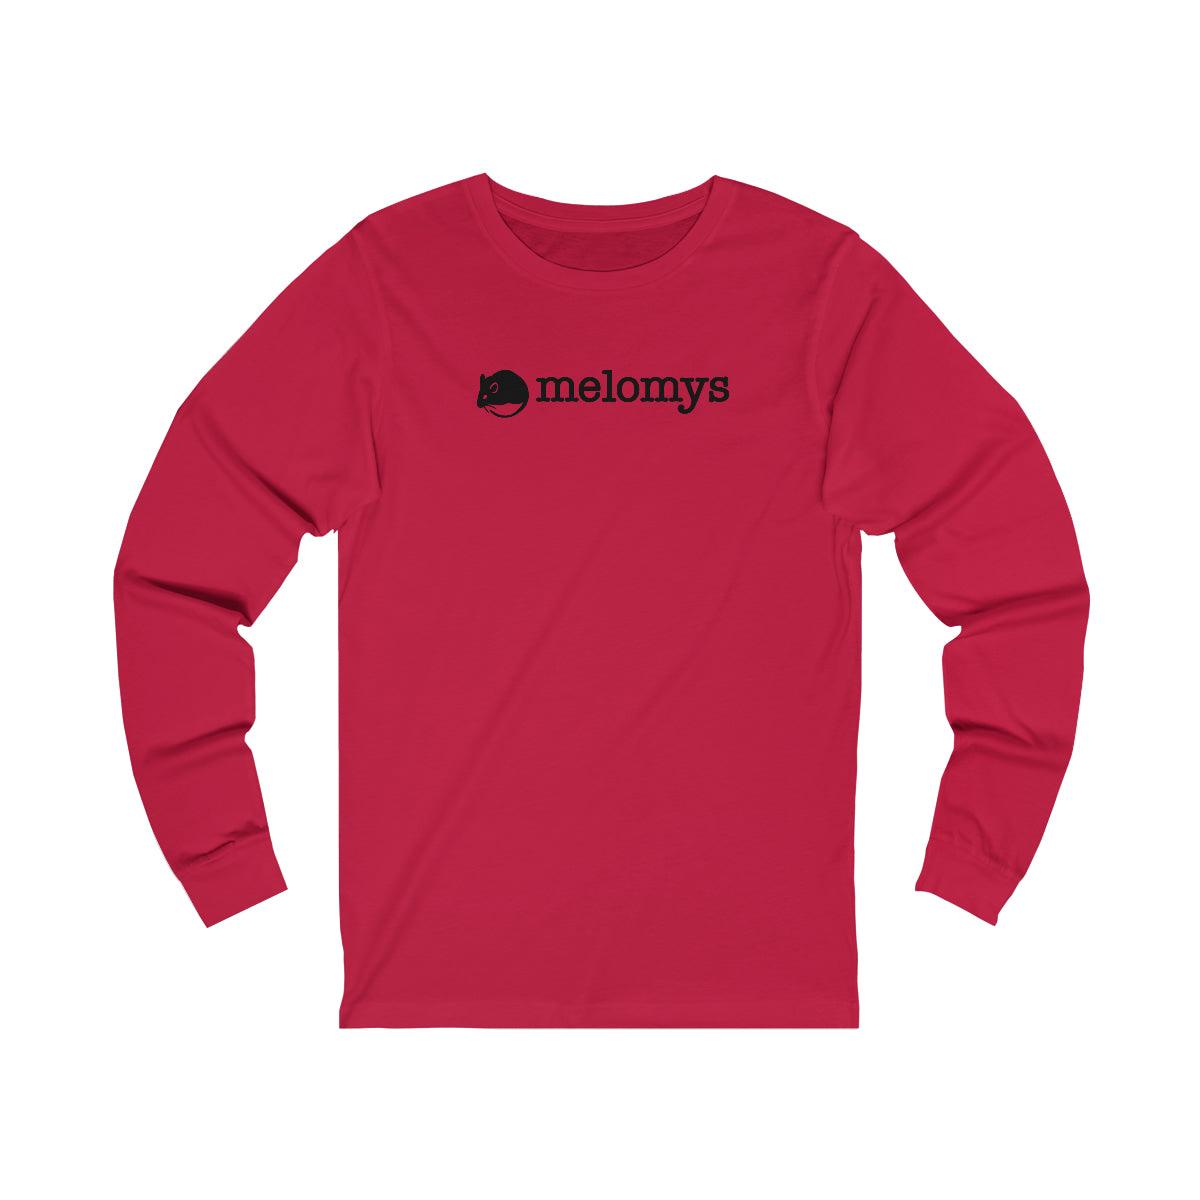 Melomys 100% Cotton Unisex Jersey Long Sleeve T-Shirt - Melomys